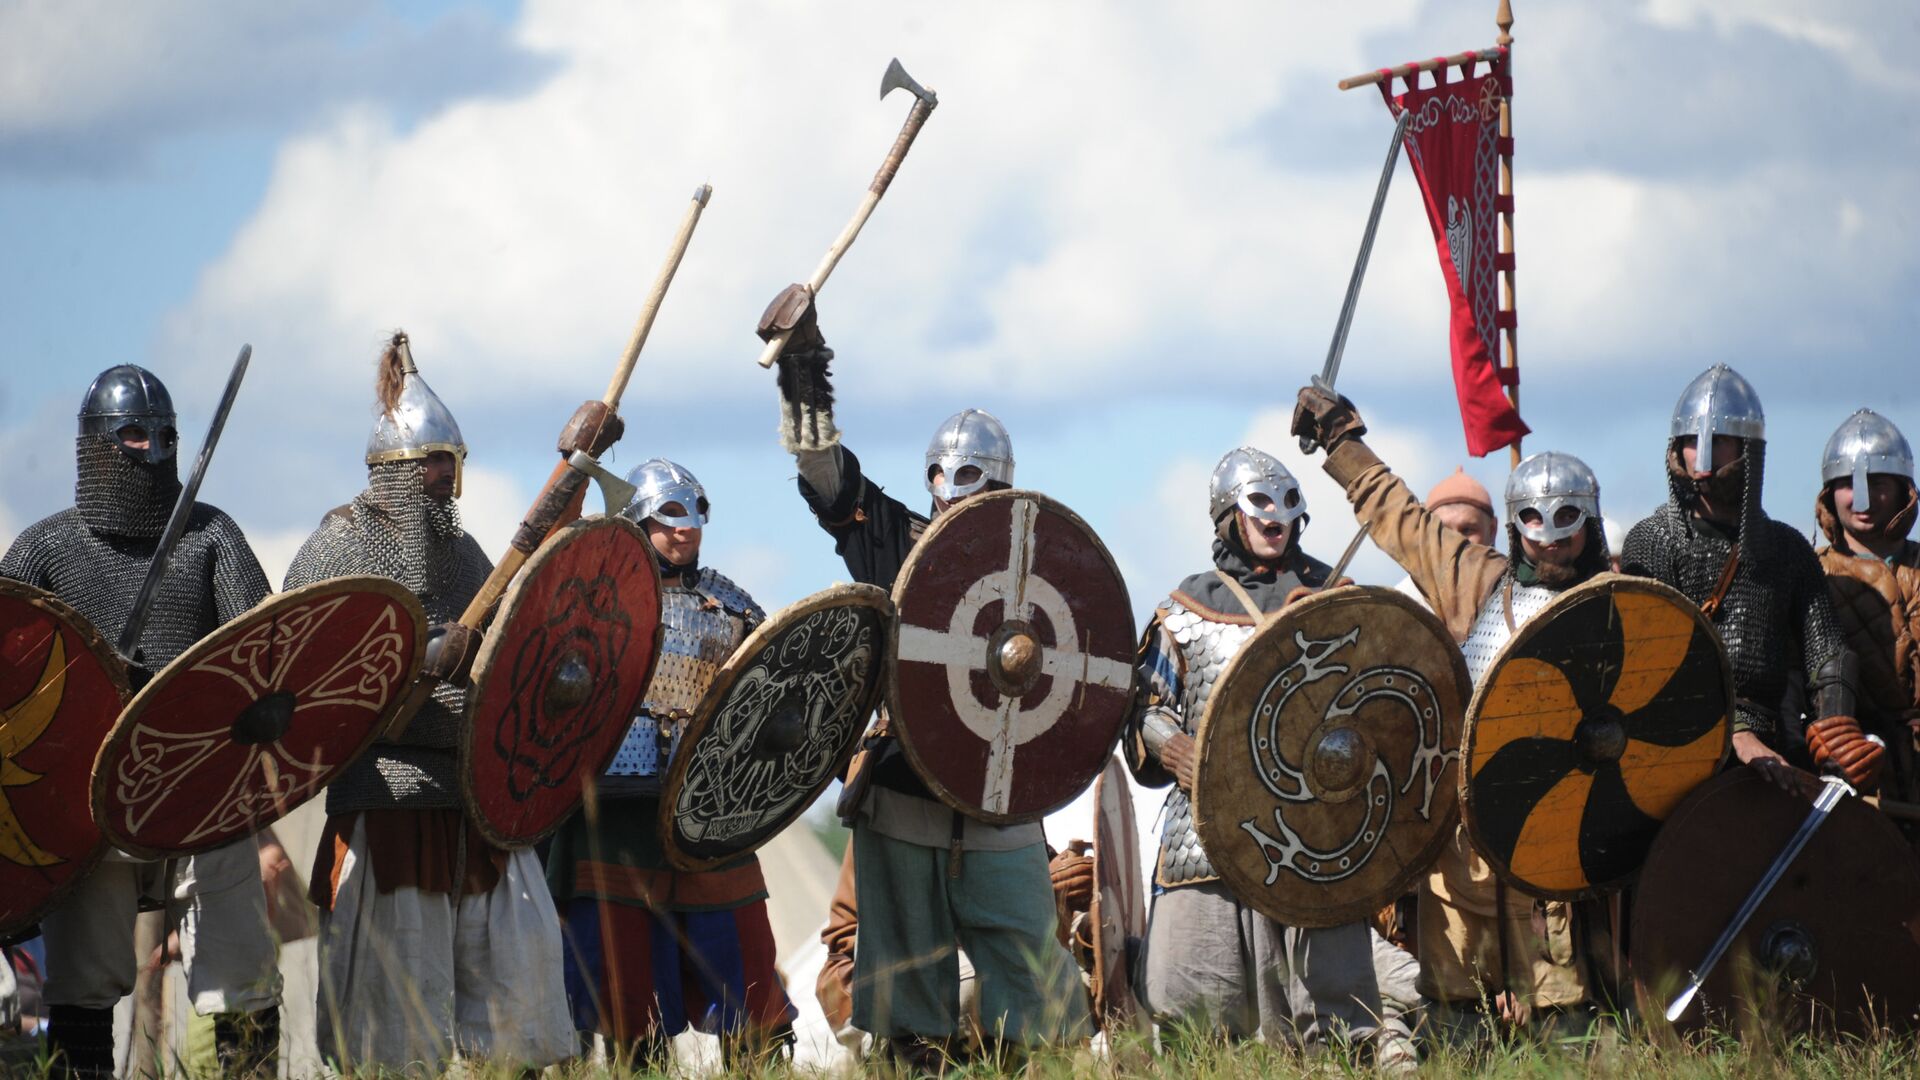 Vikings at The Warrior's Field, an annual festival of history clubs, held in Drakino Park in the Serpukhovsky district. (File) - Sputnik International, 1920, 01.10.2021